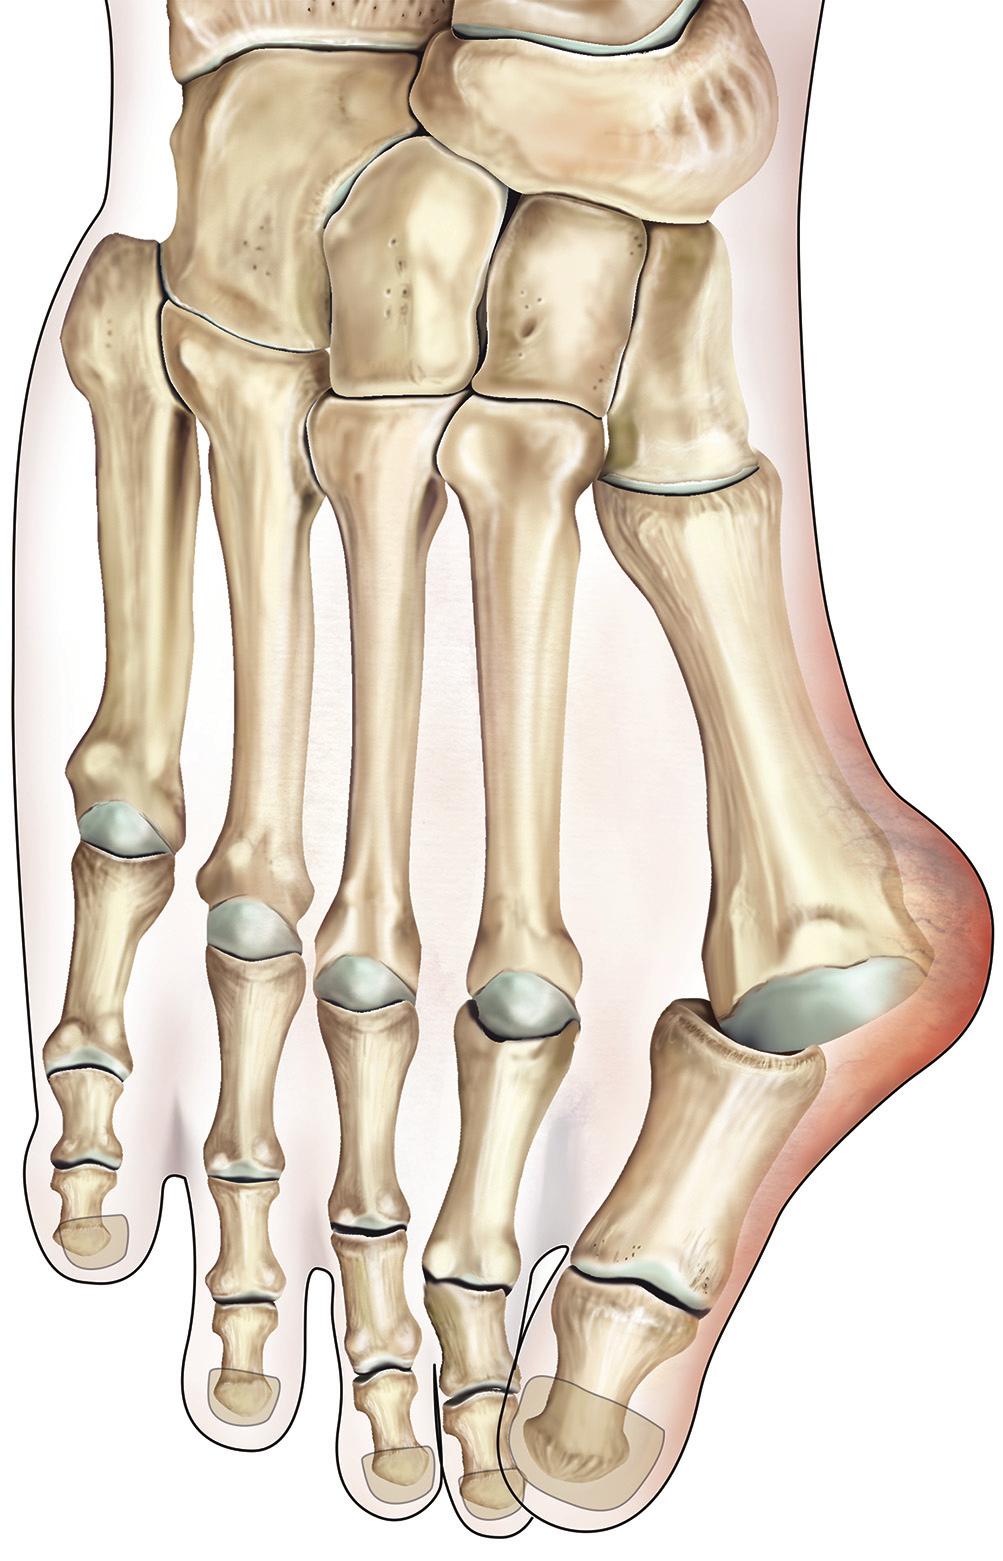 What is a bunion? A bunion is a bony lump on the side of your foot at the base of your big toe (see figure 1).